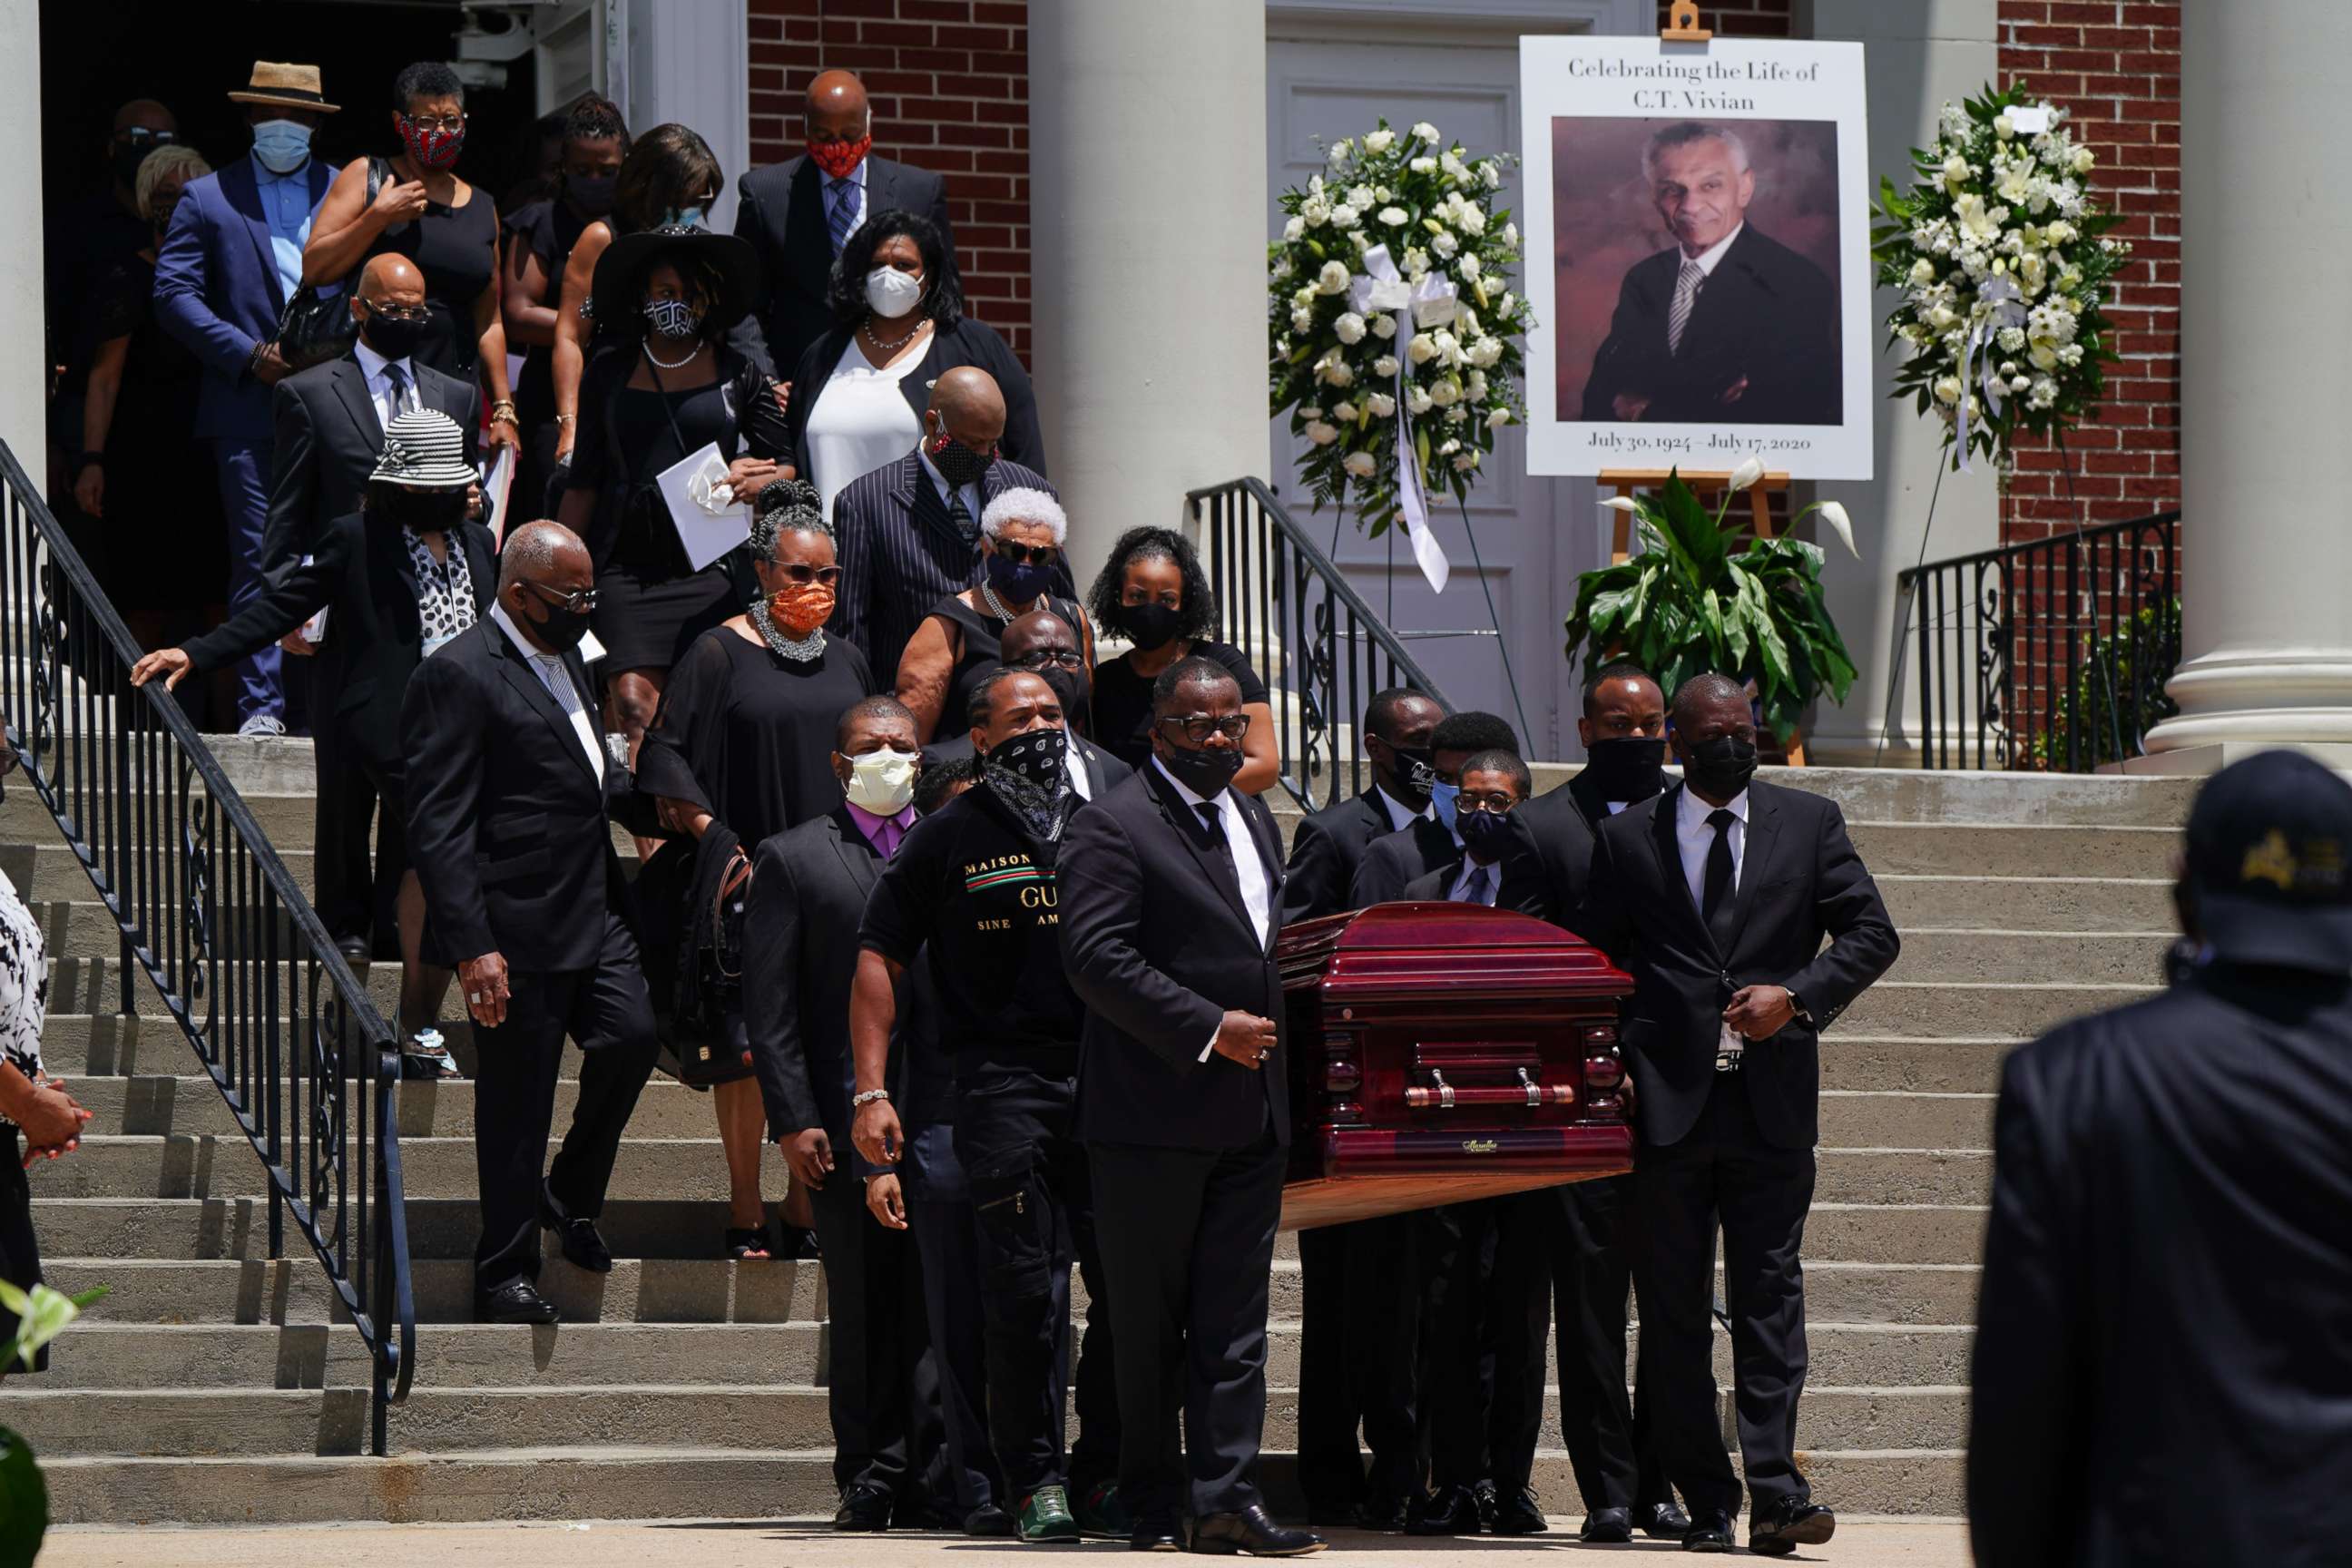 PHOTO: The casket holding the body of civil rights icon C.T. Vivian is carried out of Providence Missionary Baptist Church following his funeral service on July 23, 2020 in Atlanta, Georgia.